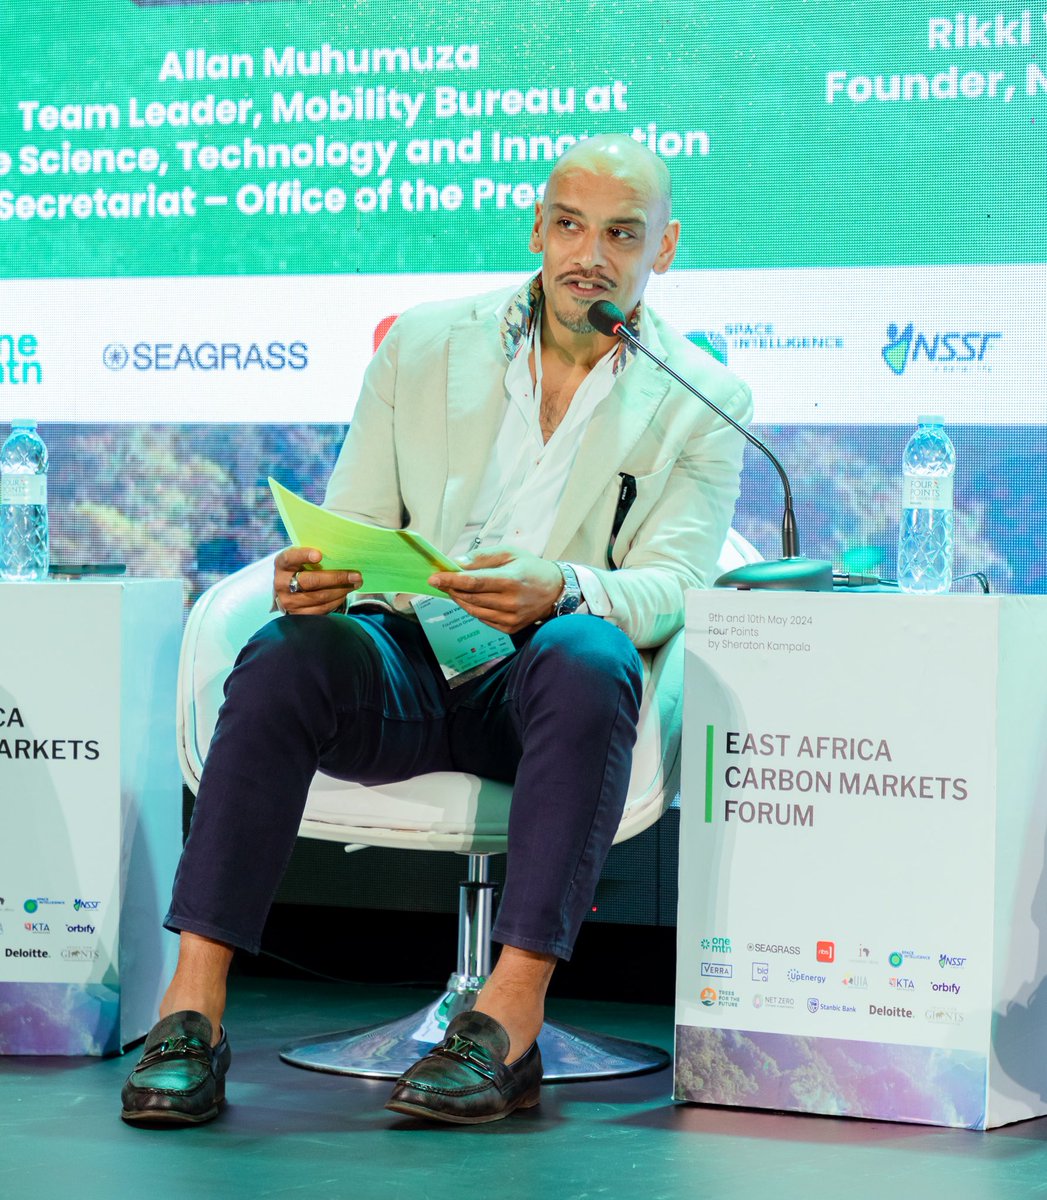 .@honrikki, Founder & CEO @nexusgreenltd; We’re the largest company in Uganda and top 5 in East Africa, supplying, manufacturing, and delivering affordable solar-powered solutions designed for over 458 million people in the East African Region without access to reliable energy.